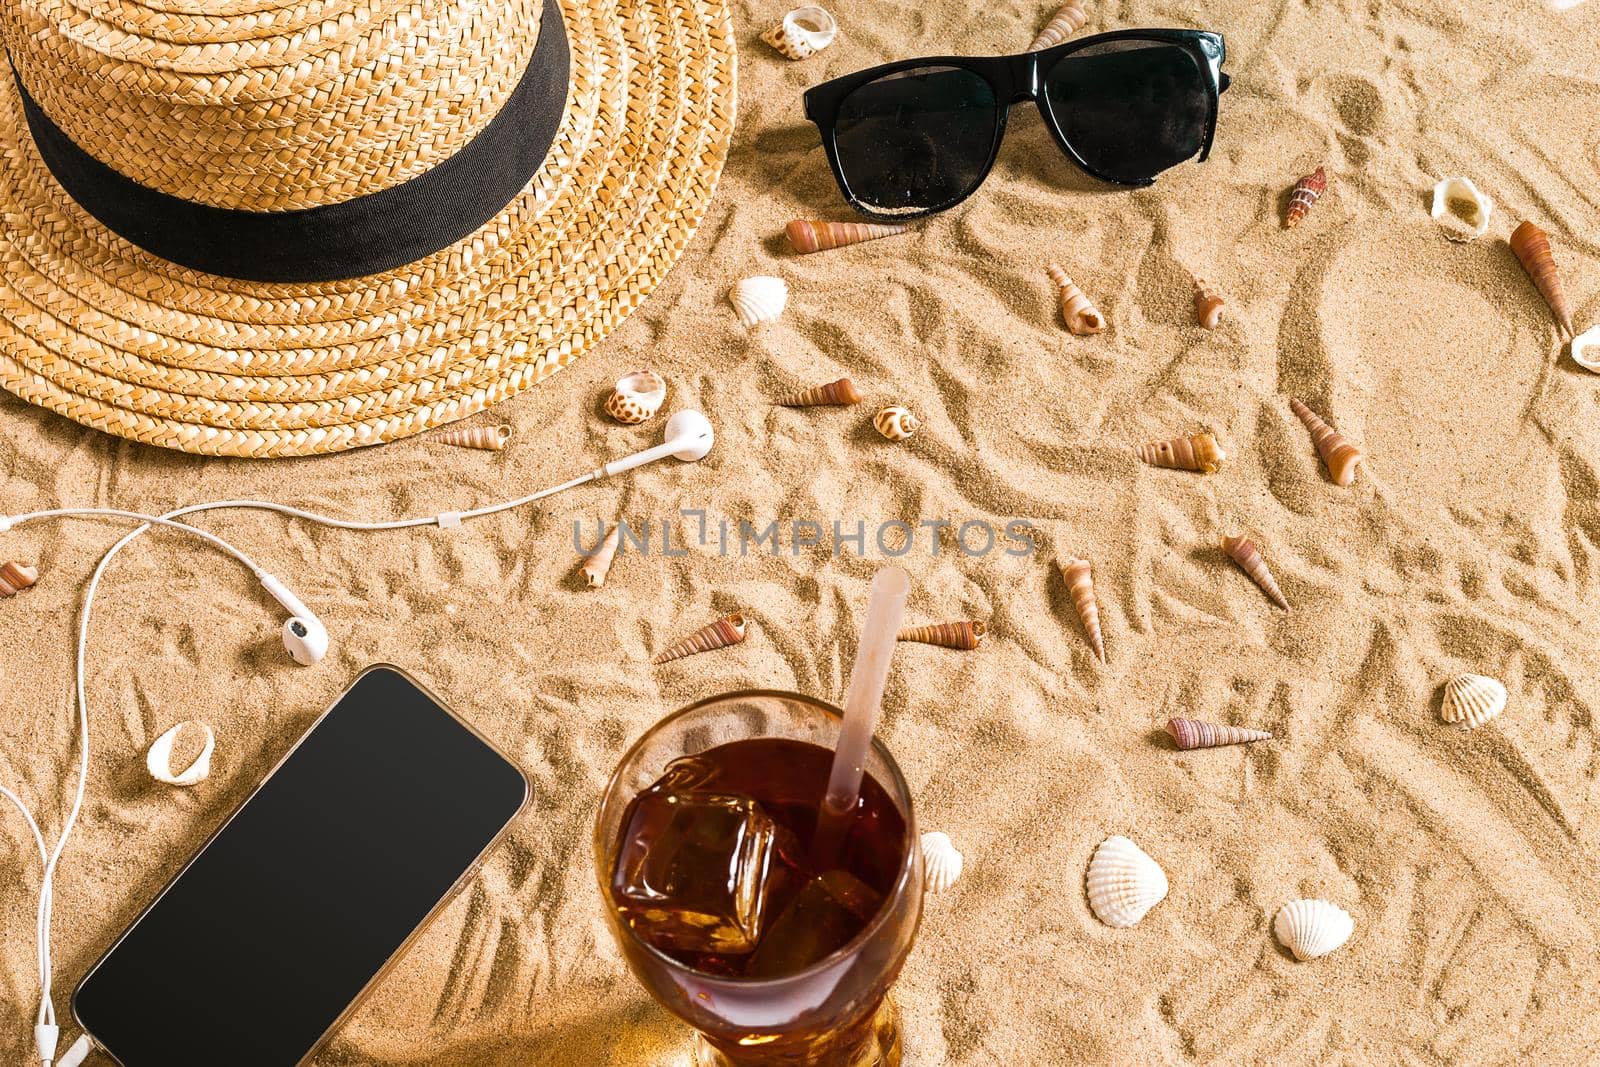 Summer beachwear, sunglasses, hat, cold drink in a glass and seashells on sand beach. Top view. Copy space. Still life mockup flat lay